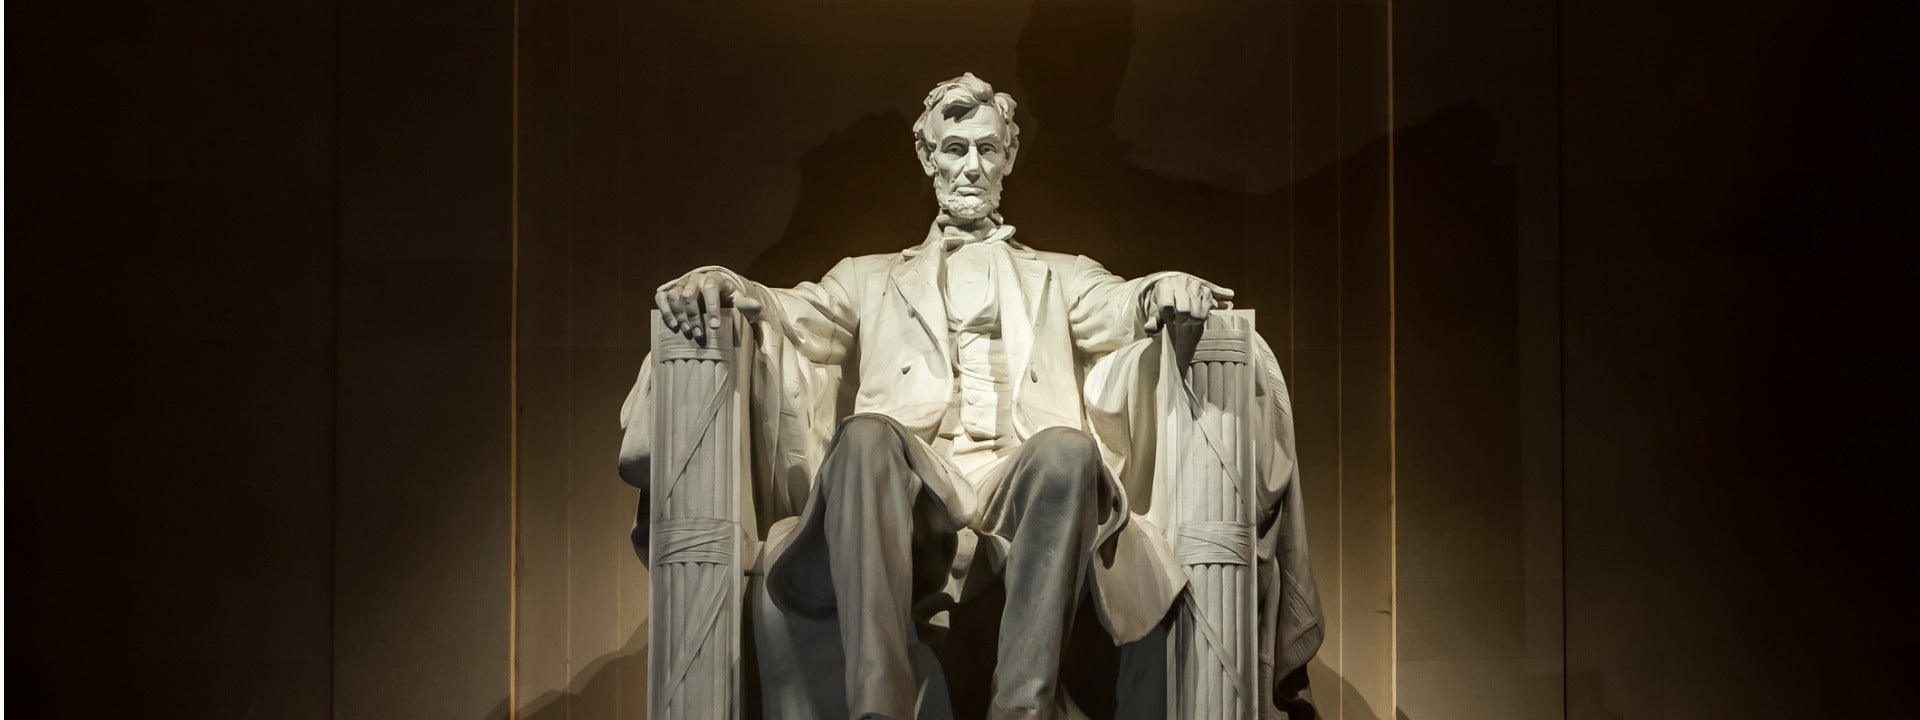 Learning from Lincoln: Leadership in a Time of Crisis